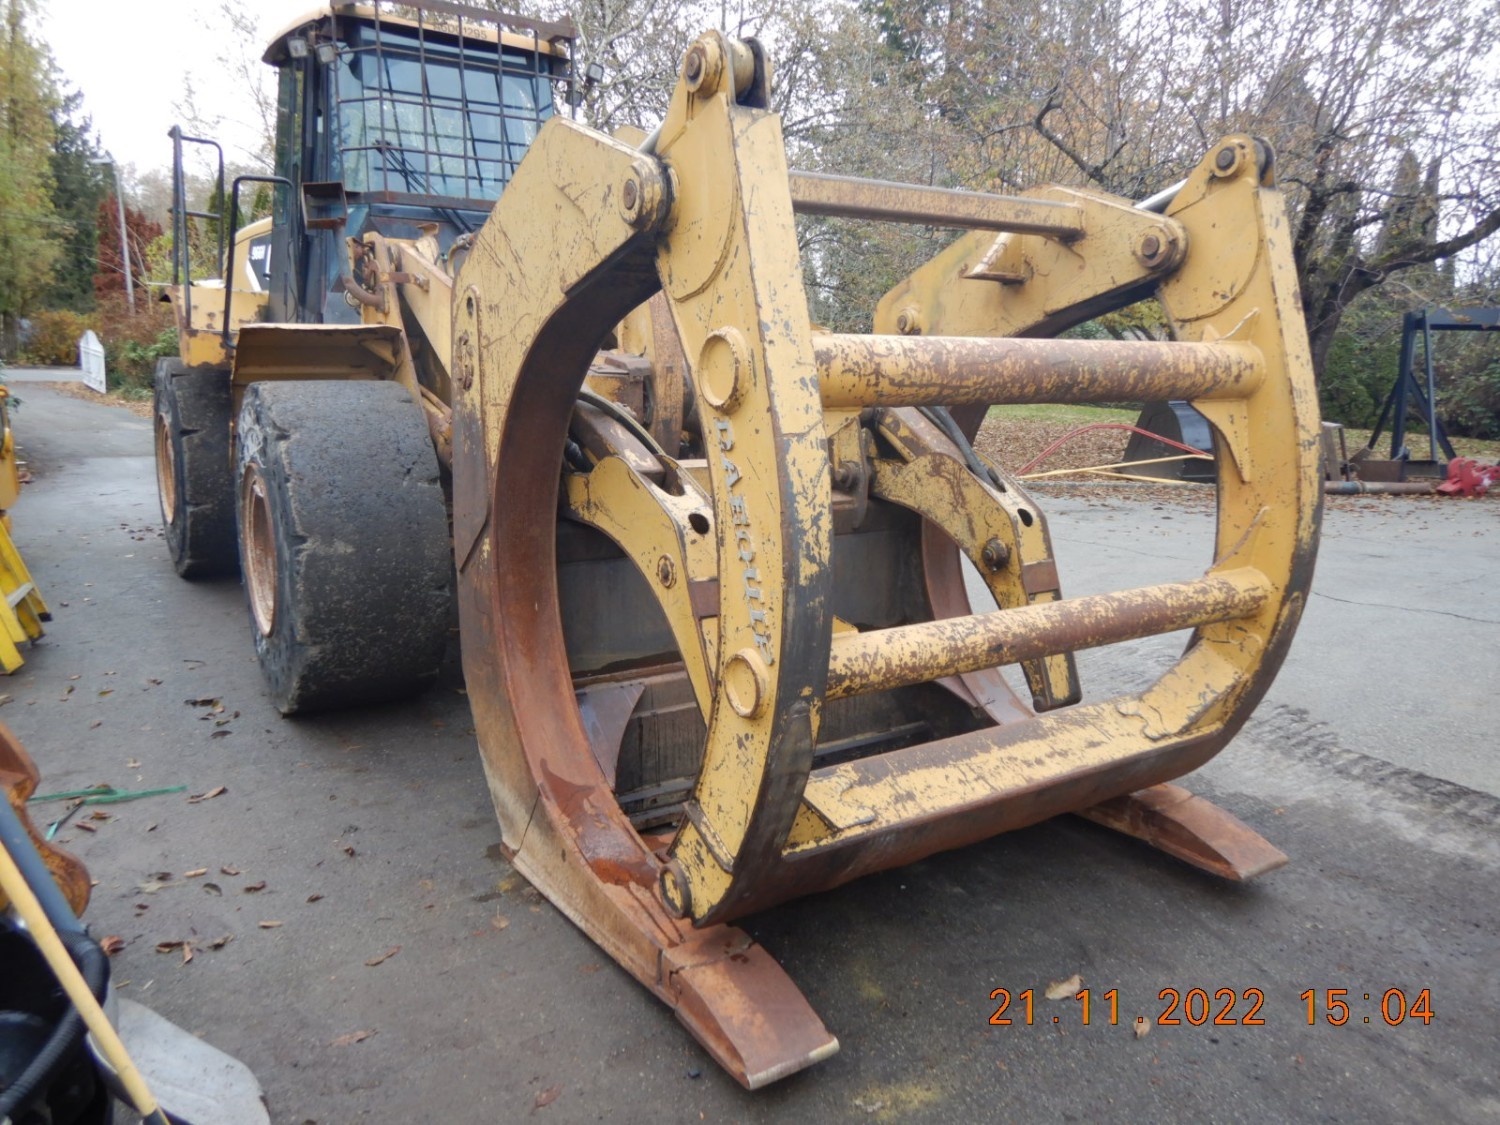 sold-2010-cat-966h-cw-custom-daequip-dual-log-or-pipe-grapple-with-internal-grapple-to-keep-pipe-logs-poles-secure-big-12